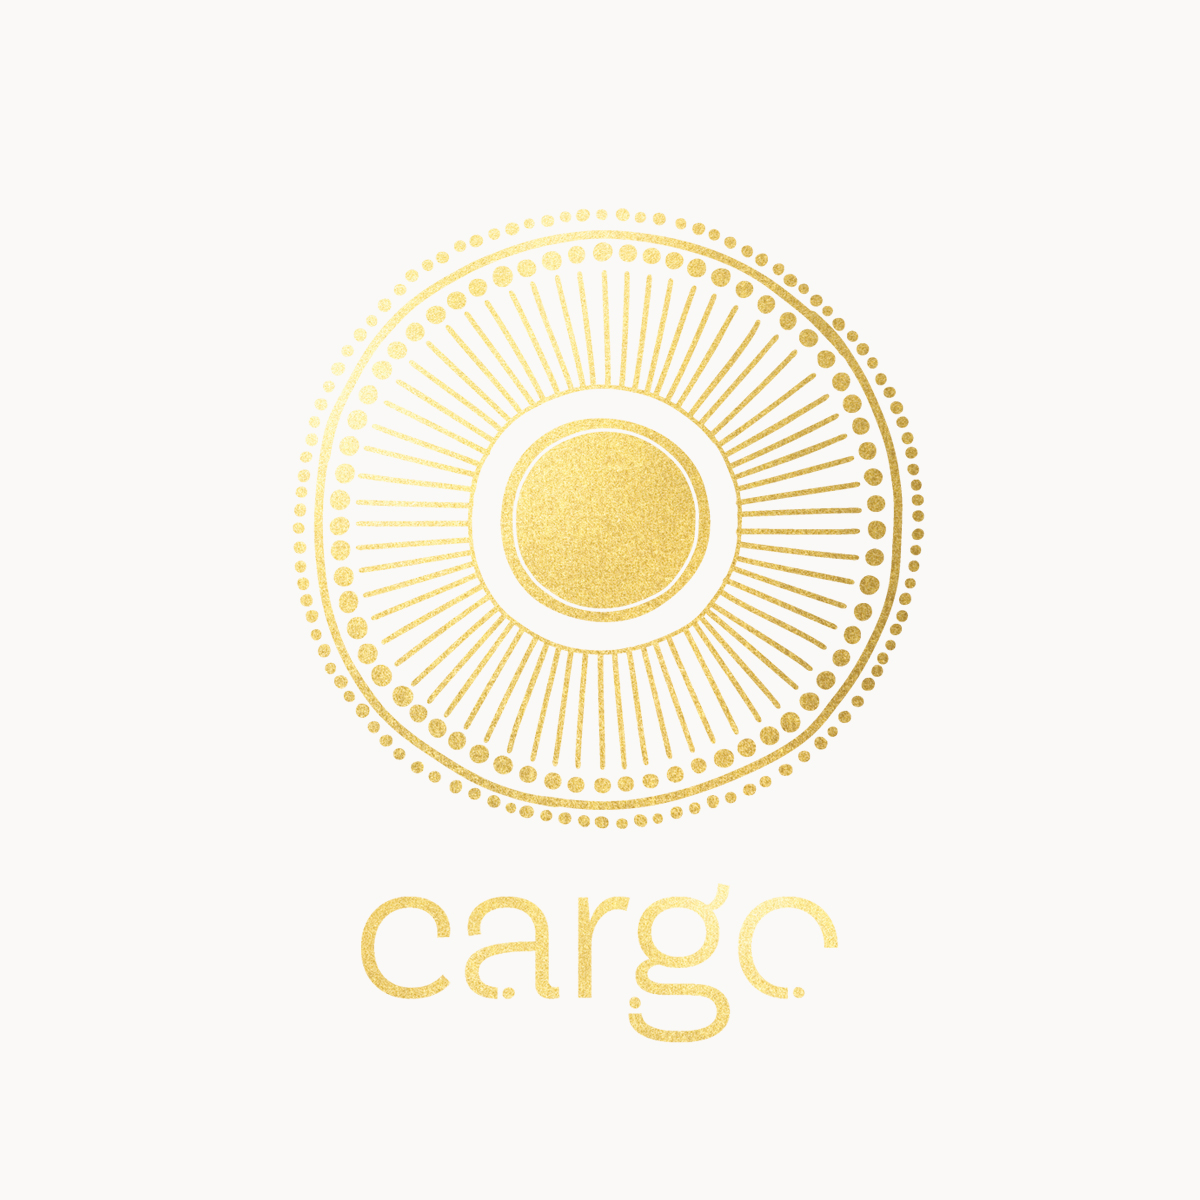 Cargo Caterging Co Logo 4